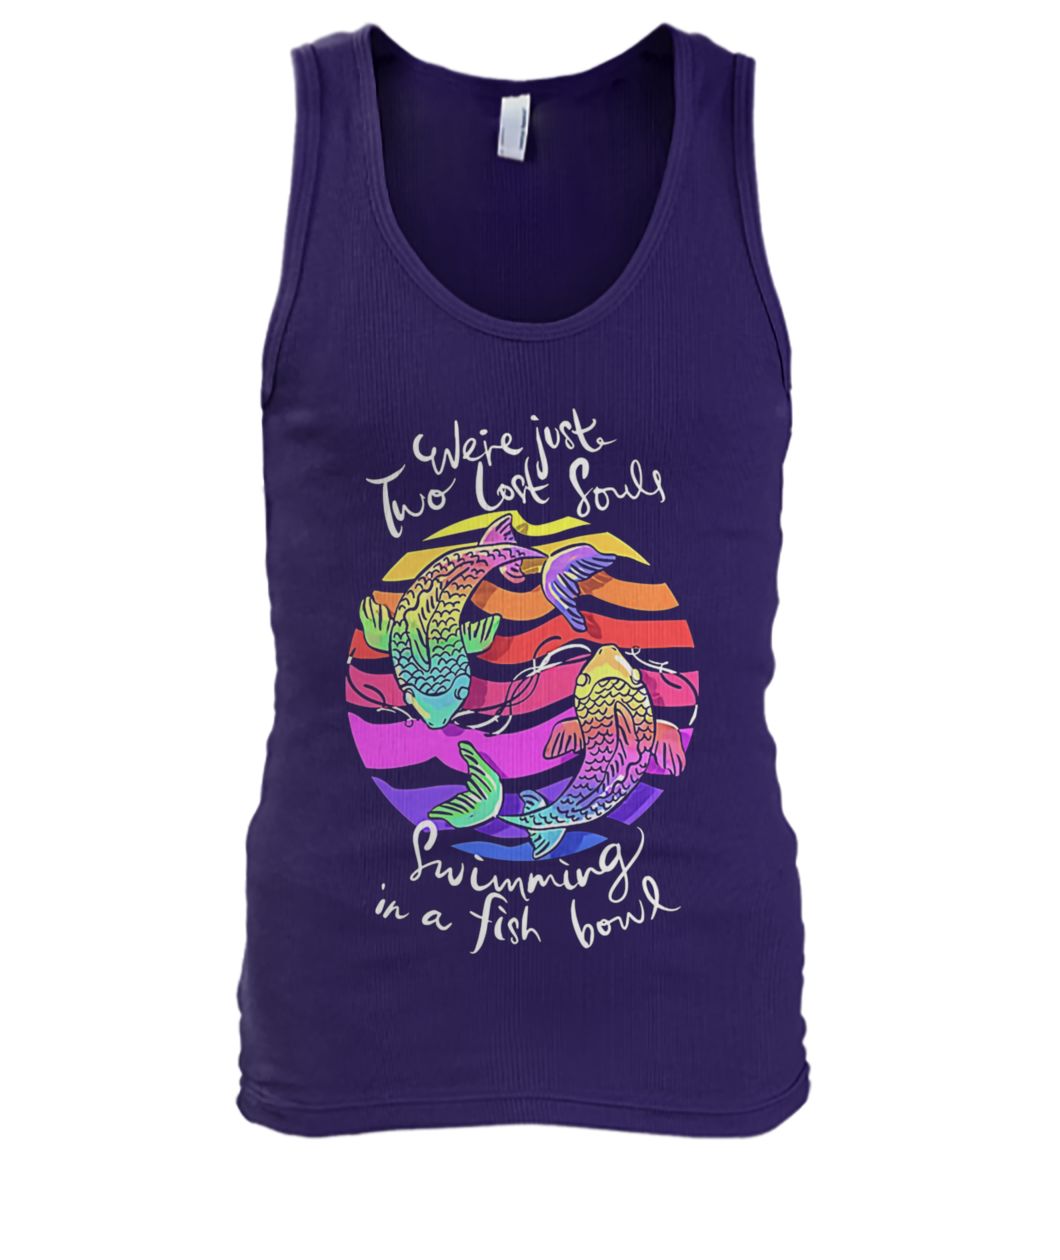 We're just two lost souls swimming in a fish bowl men's tank top